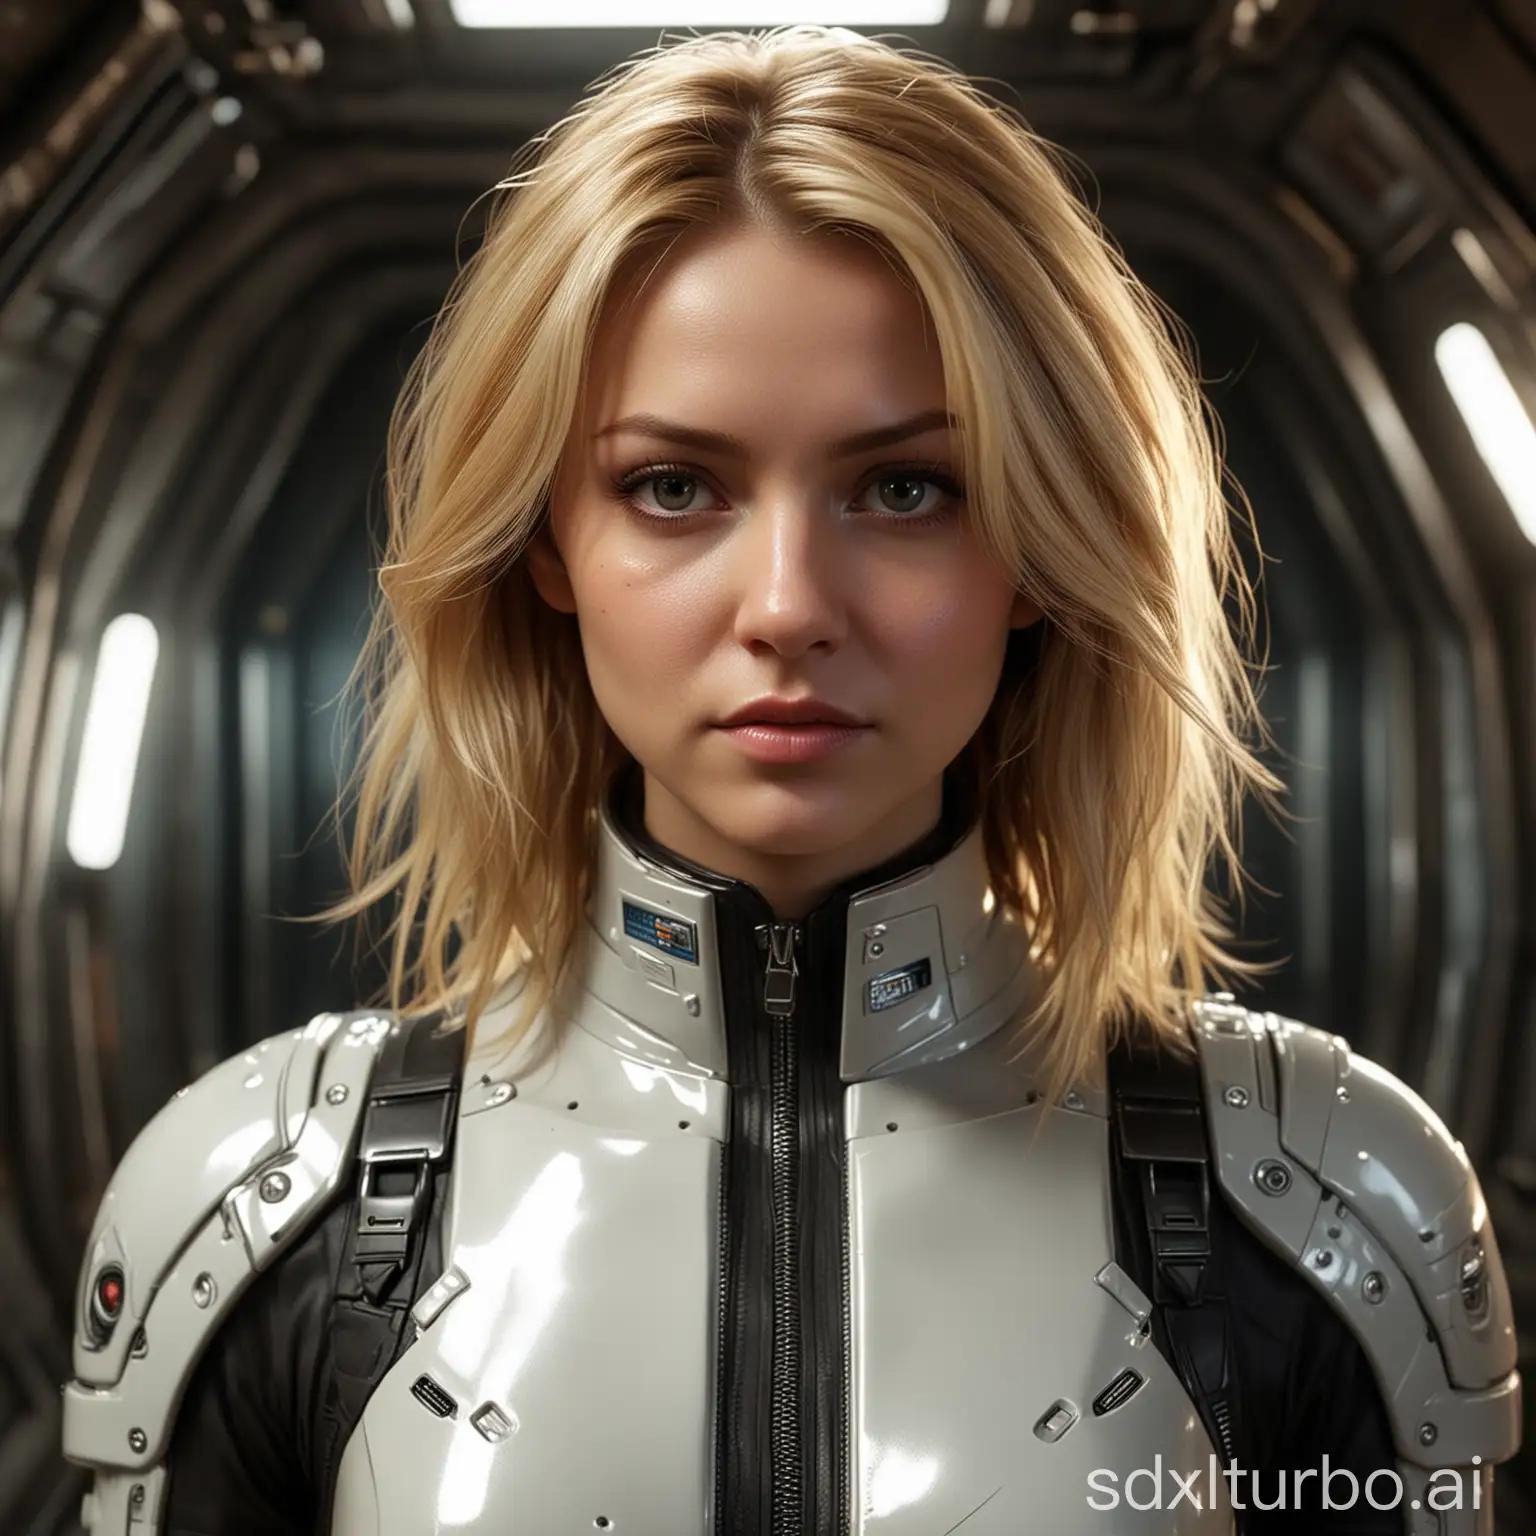 Stunning-Young-Girl-in-SciFi-Battle-Armor-Intricately-Detailed-Portrait-in-Battlestar-Galactica-Style